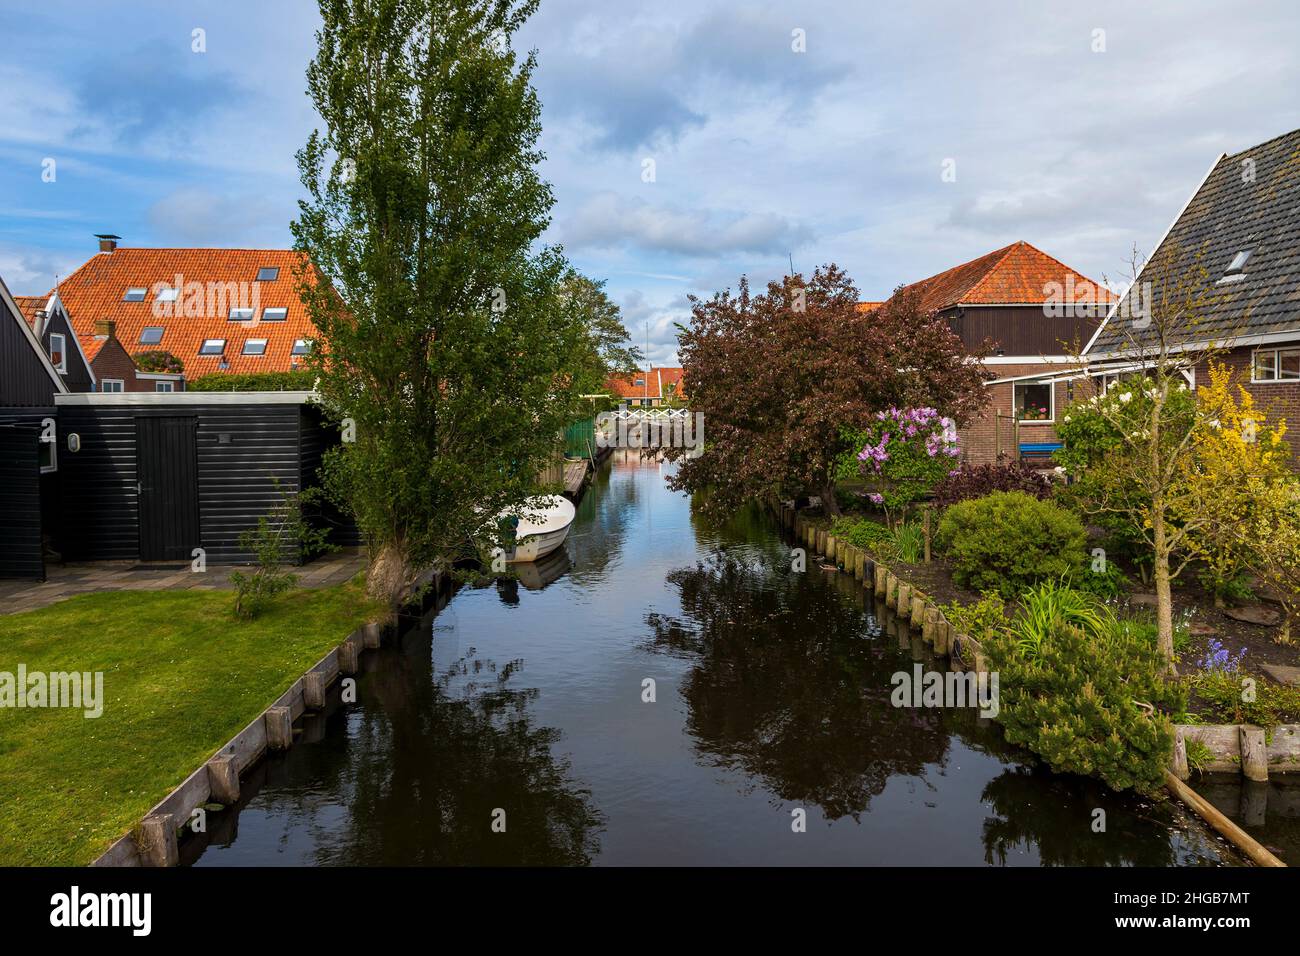 Water canal between houses in Hindeloopen in Holland. There is a boat on the water and its reflection in the water. Stock Photo